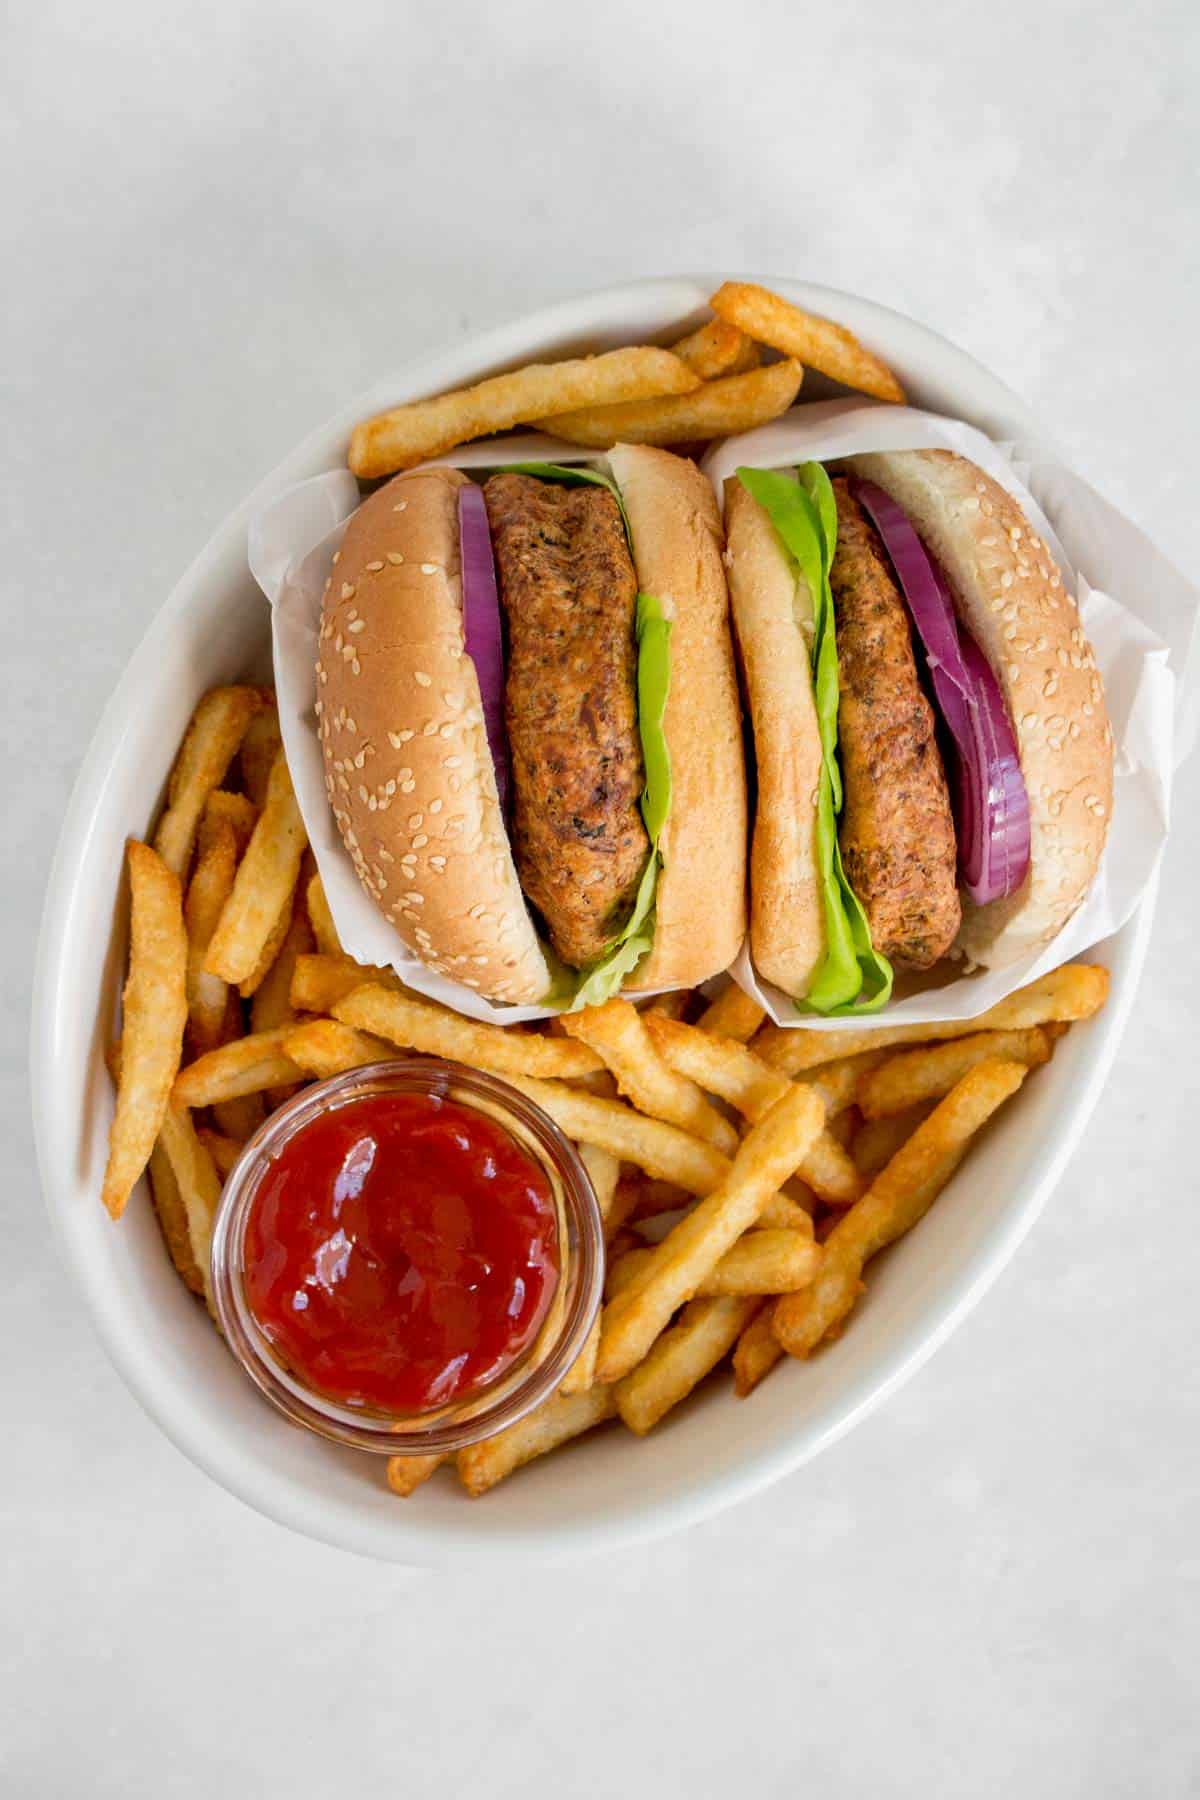 Overhead view of a serving dish with two turkey burgers with fries and ketchup.